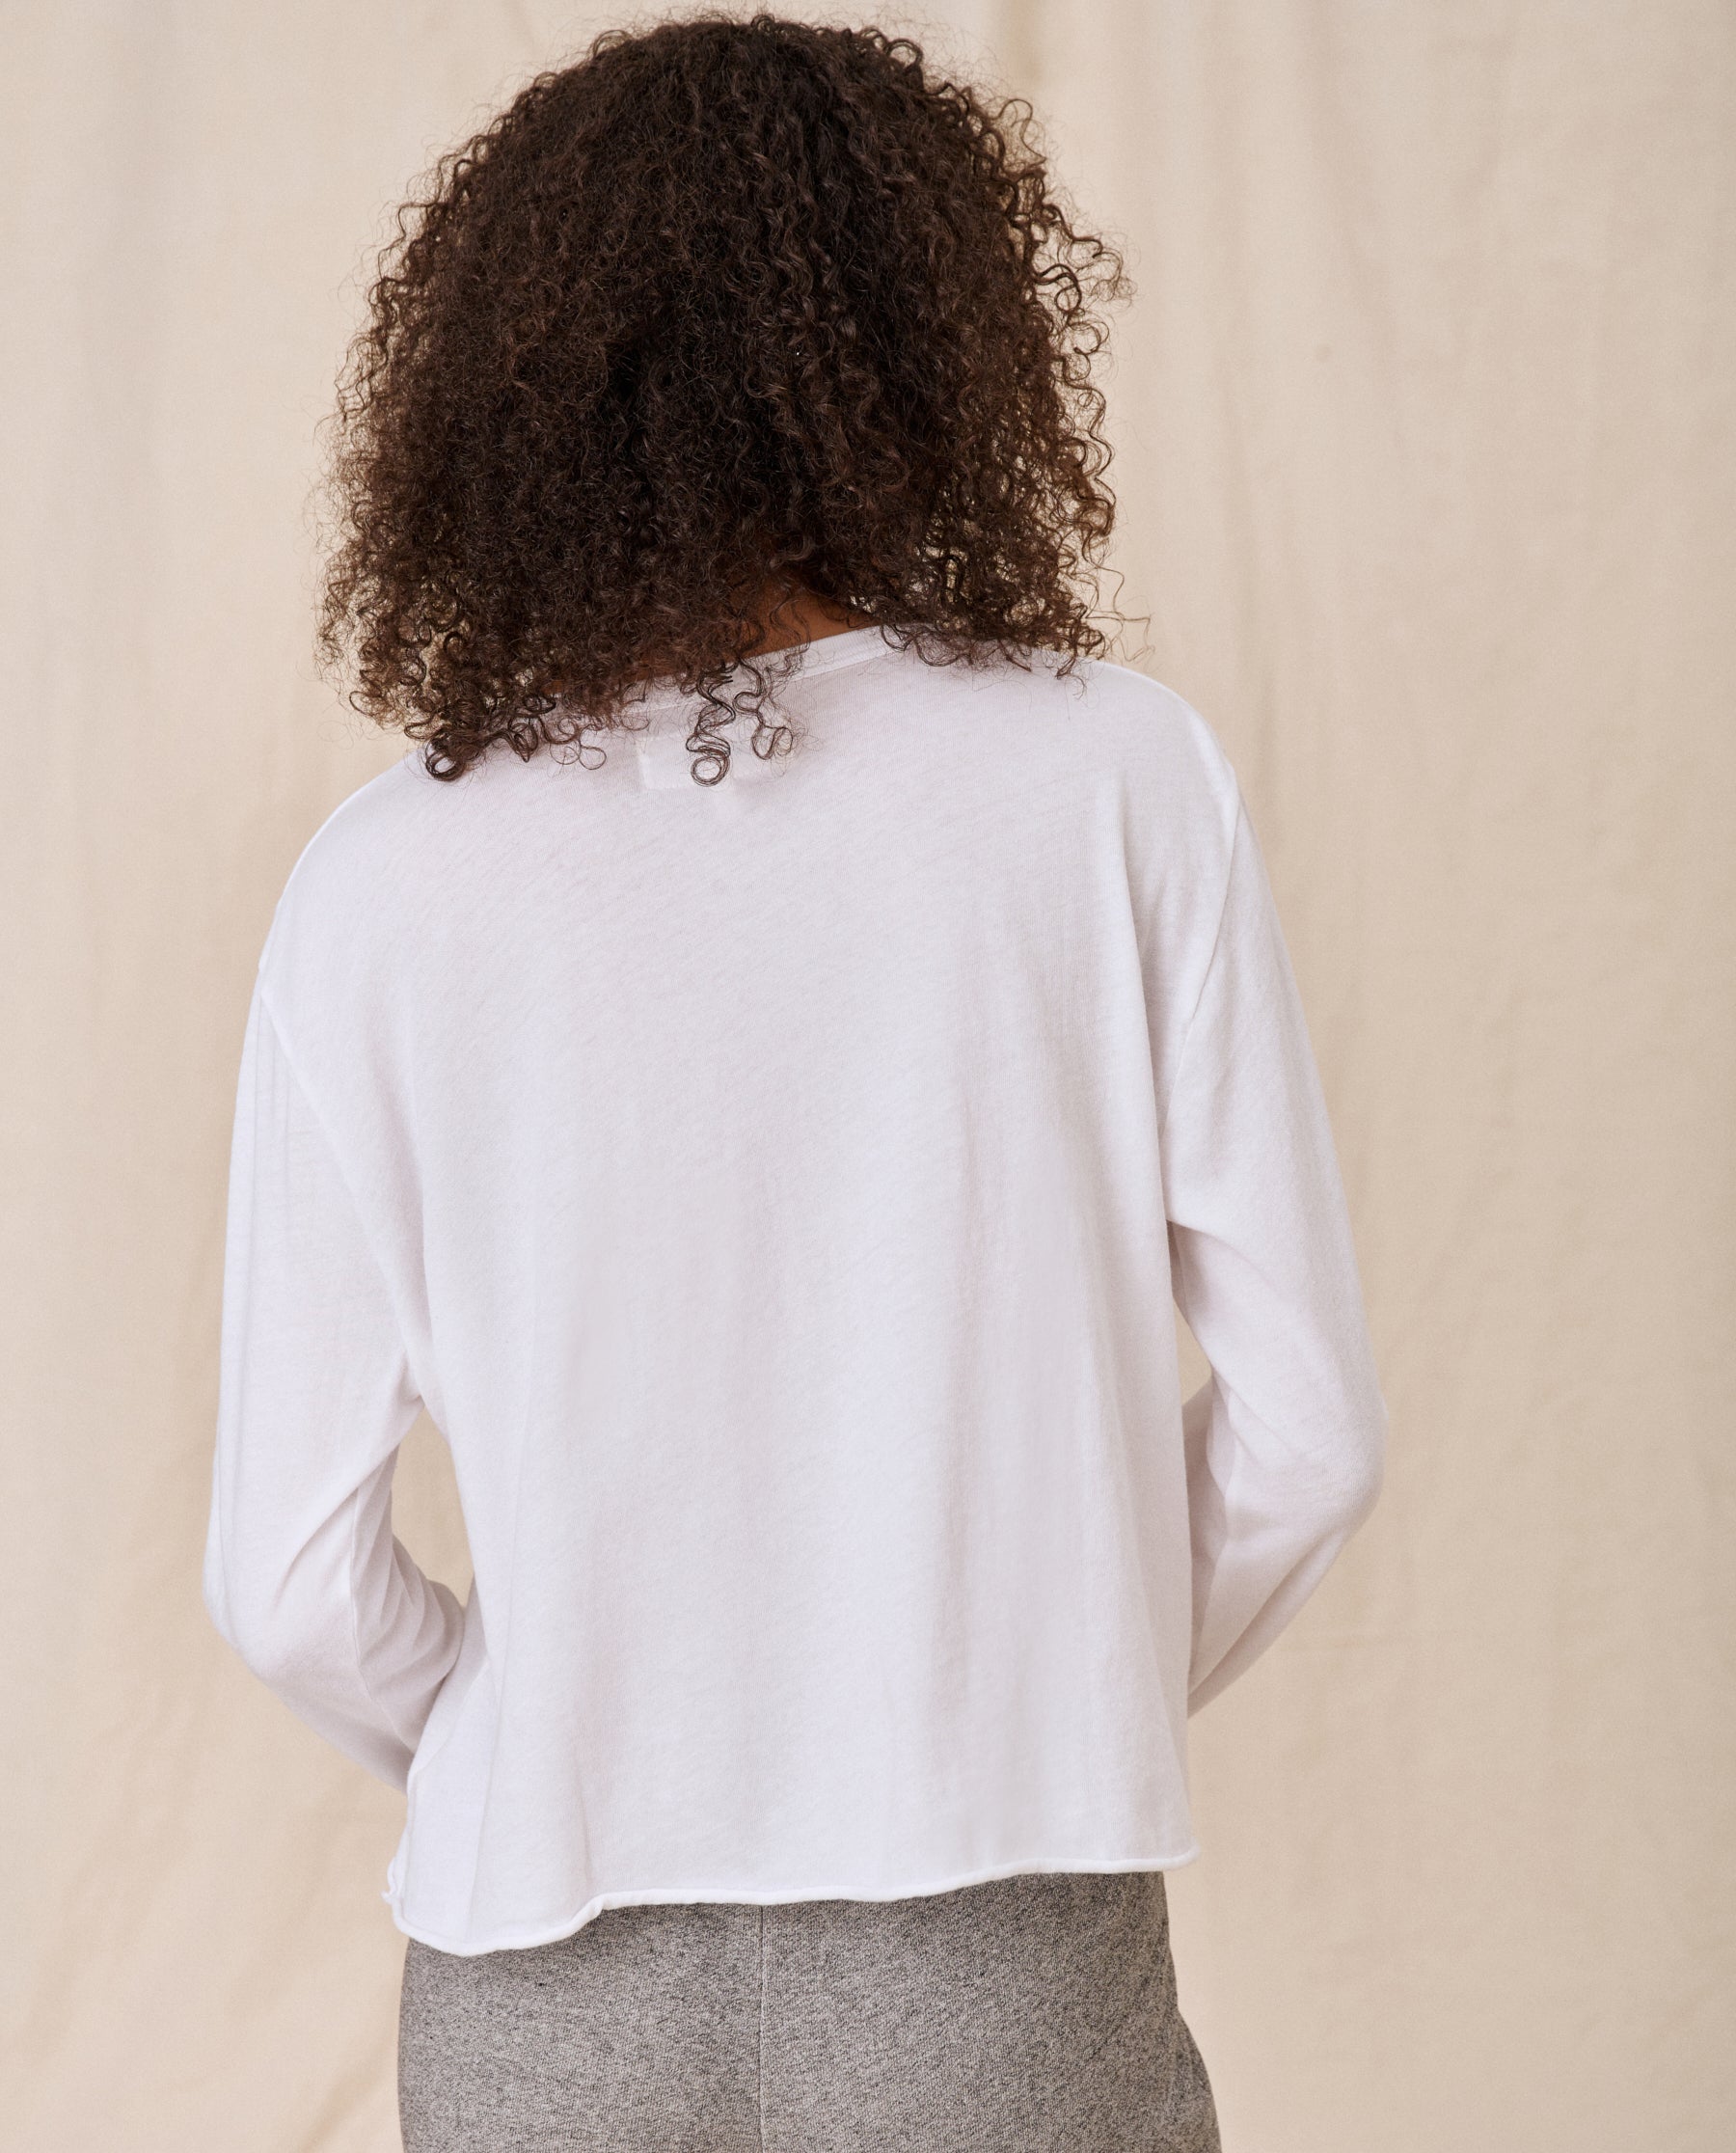 The Long Sleeve Crop Tee. -- TRUE WHITE TEES THE GREAT. CORE KNITS